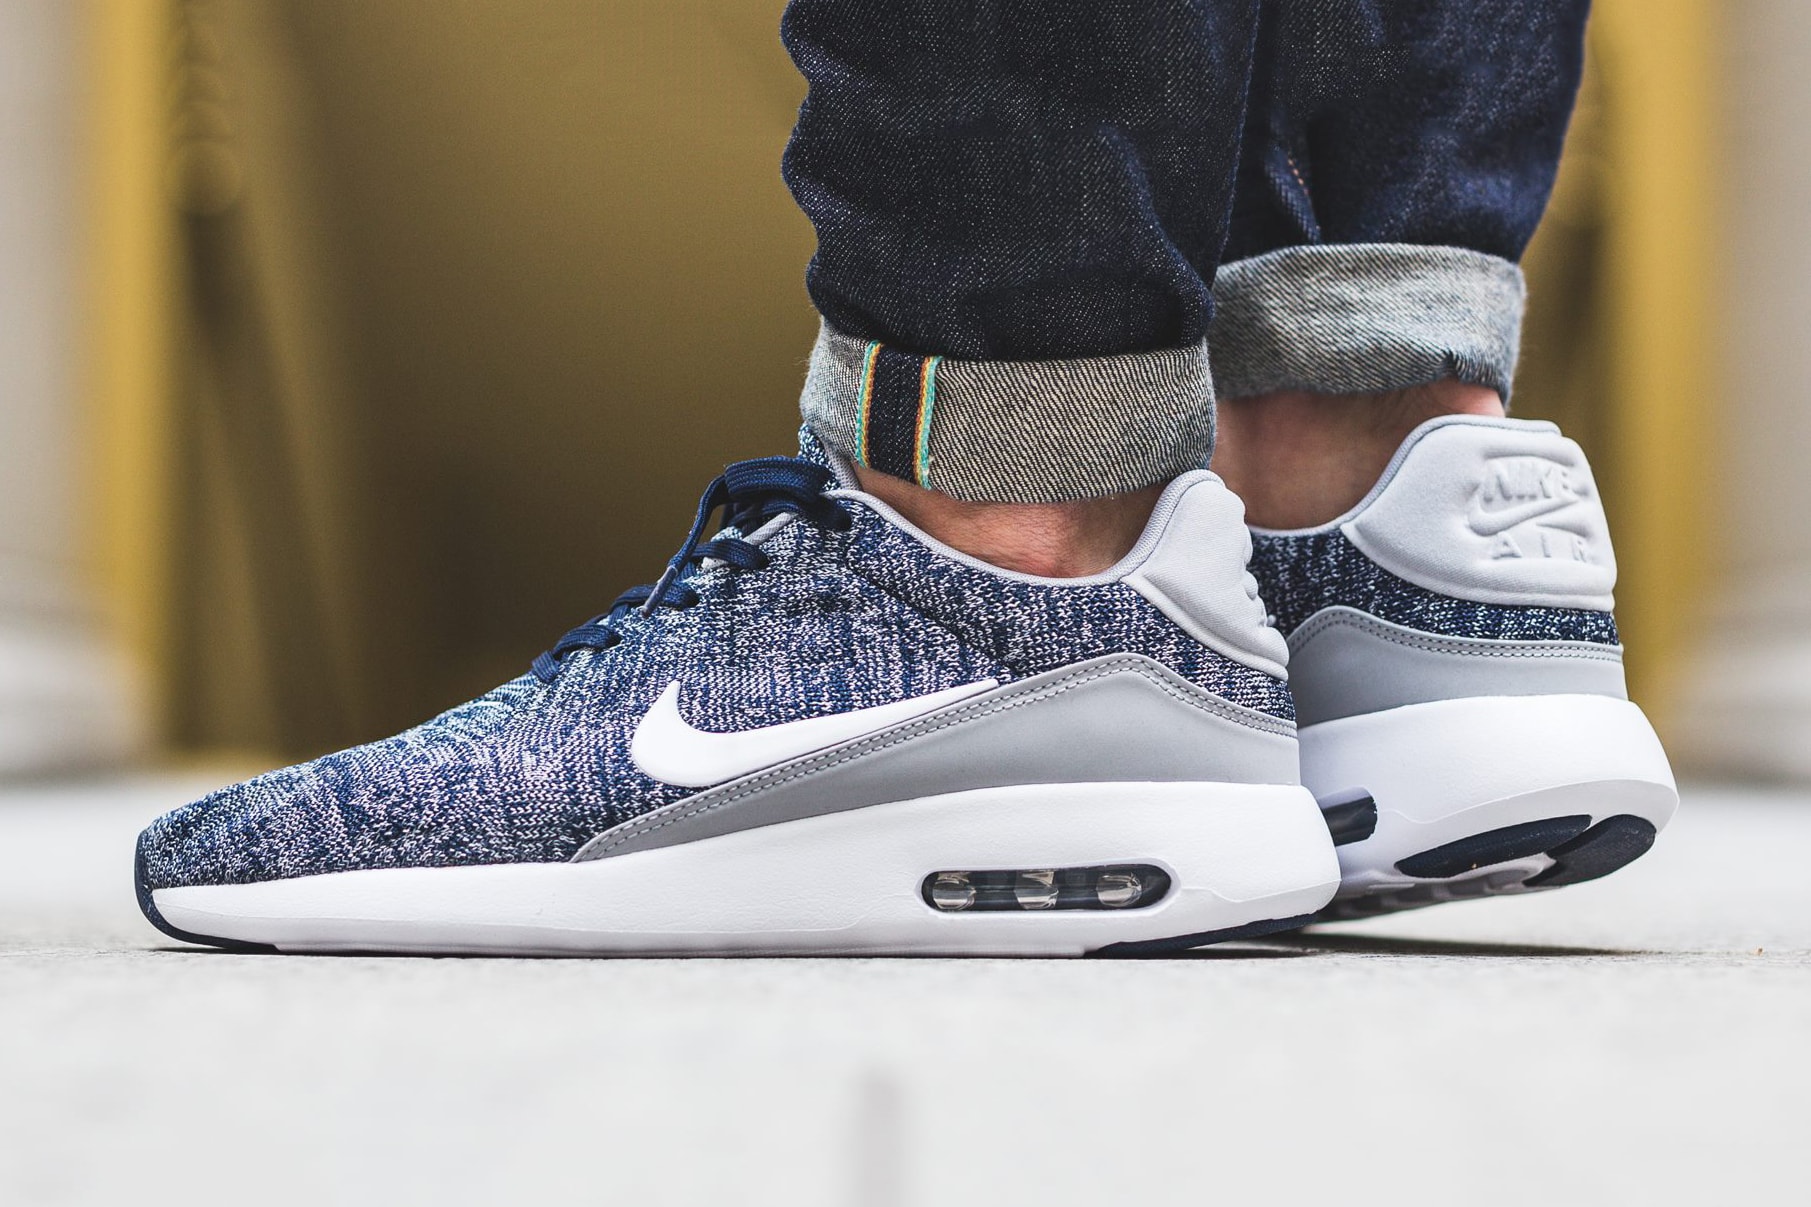 Nike Air Max Modern Flyknit "College Navy"